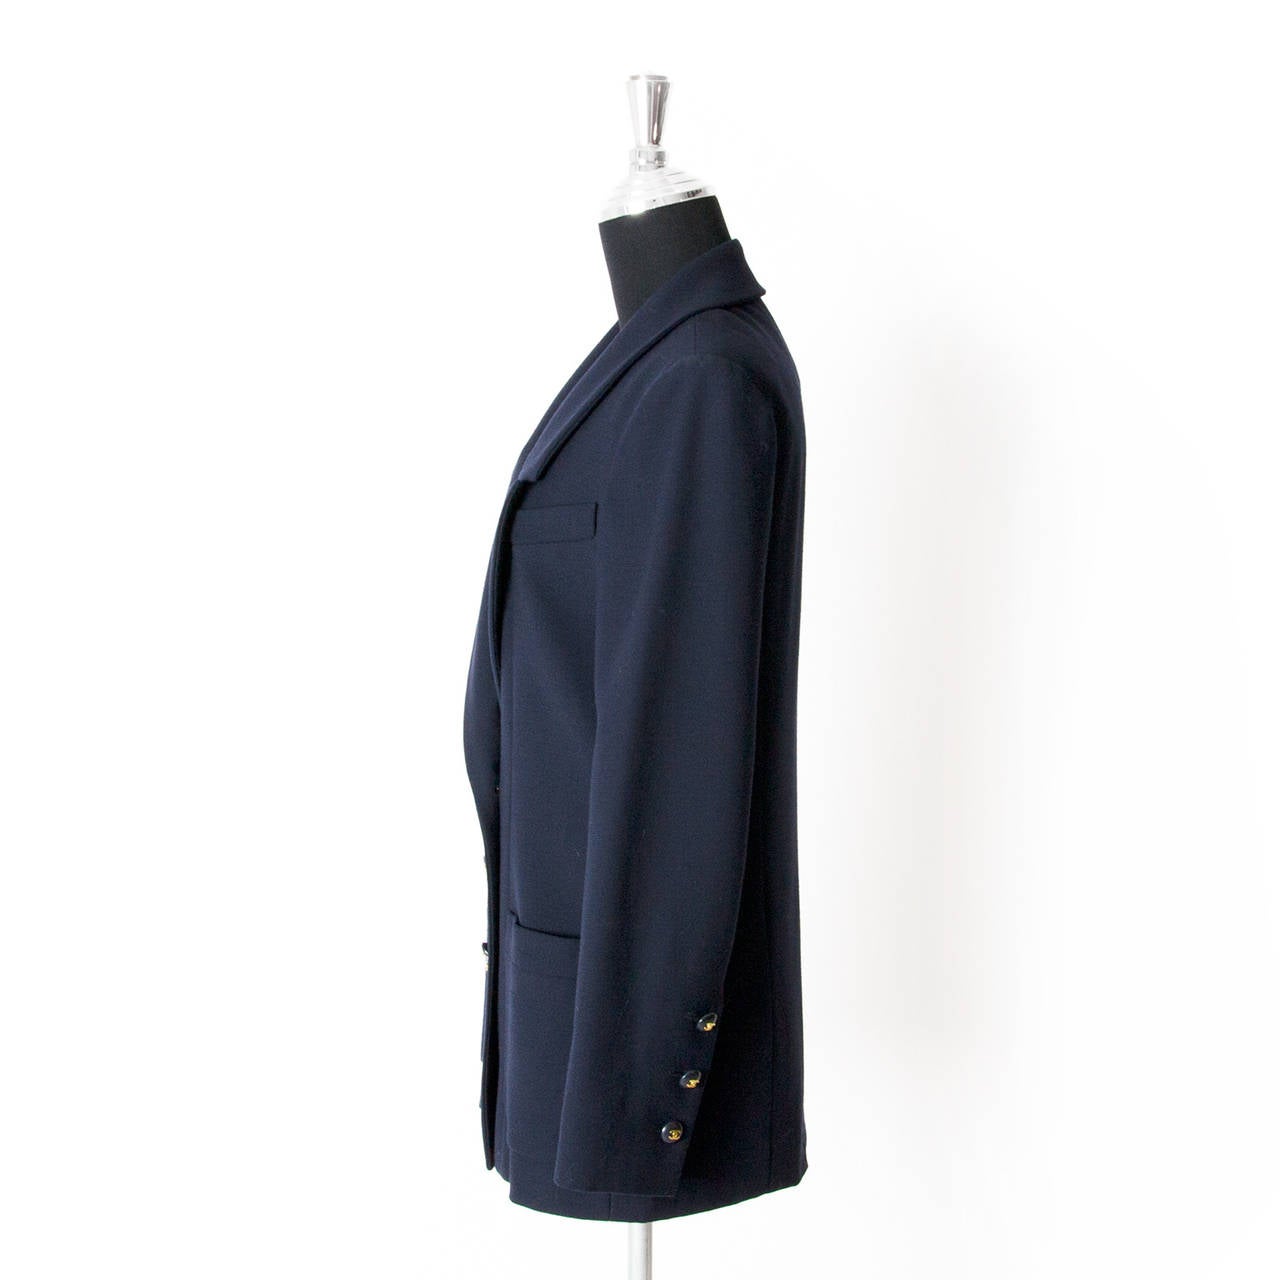 Chanel Blue Marine Classic College Blazer

This Timeless Blue Marine blazer will add some class to your outfit.

The blazer features six buttons on the front and three on each sleeve. 

Made of wool with a silk lining.